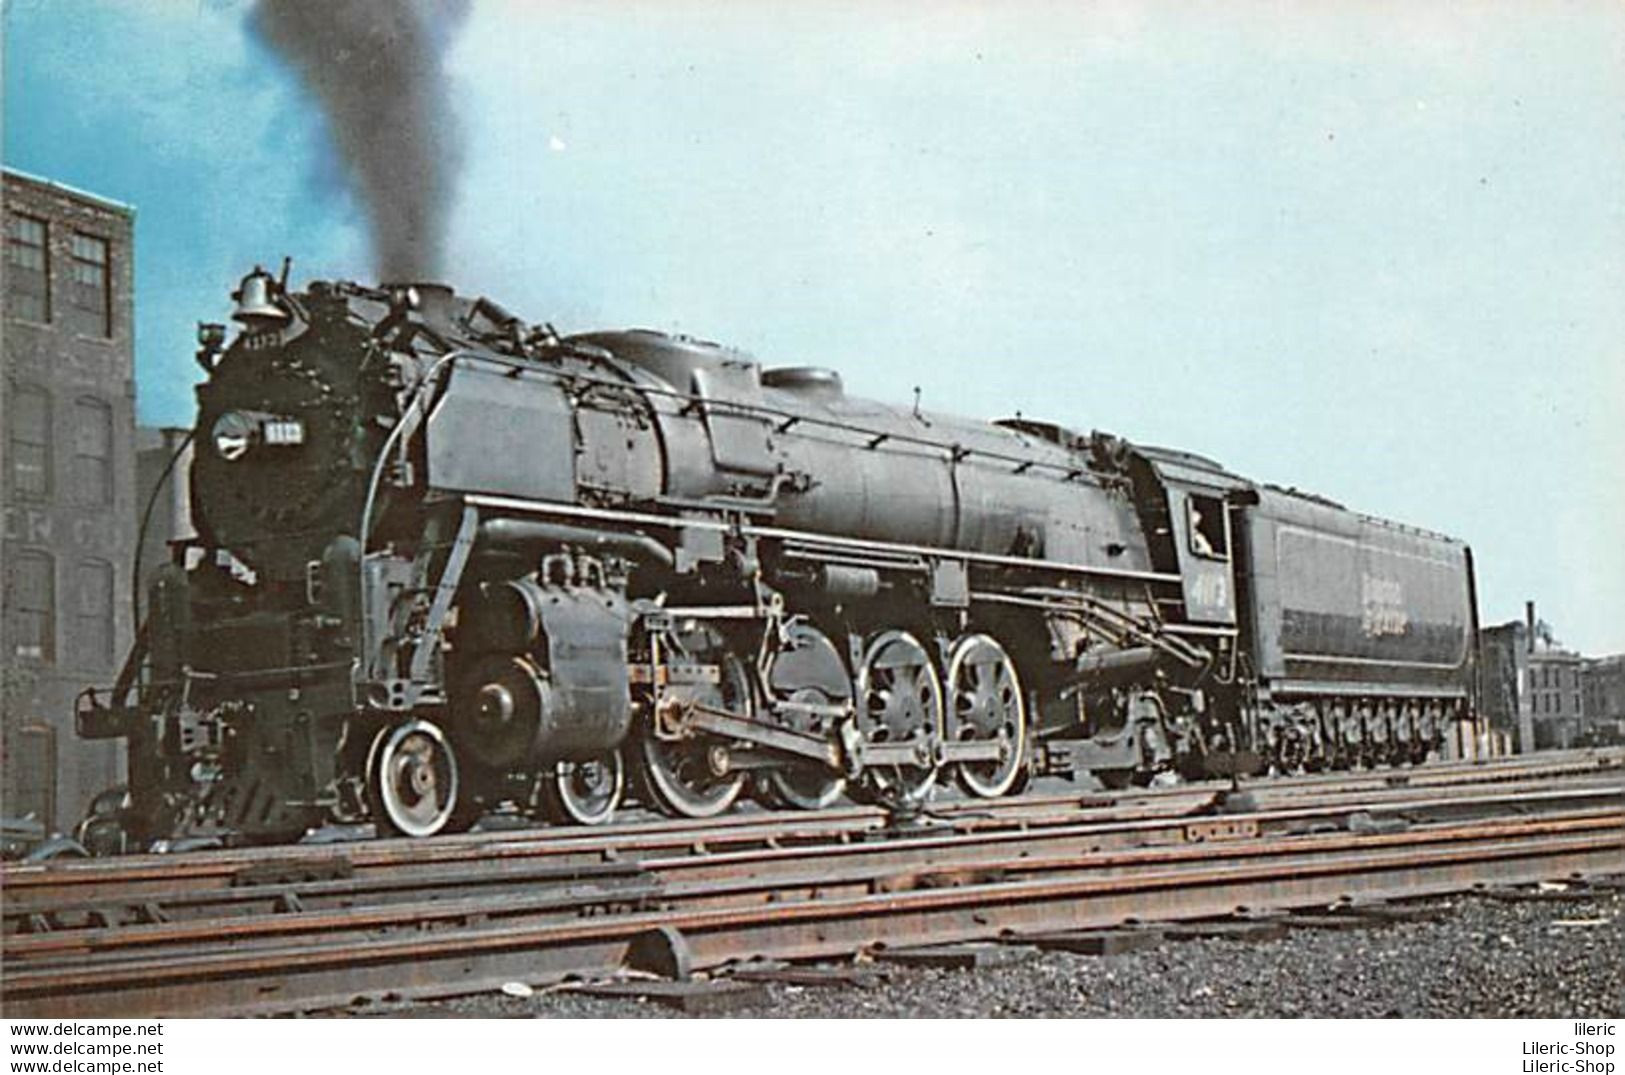 BOSTON & MAINE 4113 CARRIED THE NAME " BLACK ARROW " - WORCESTER, MASS, IN 1946 # TRAINS # US - Eisenbahnen